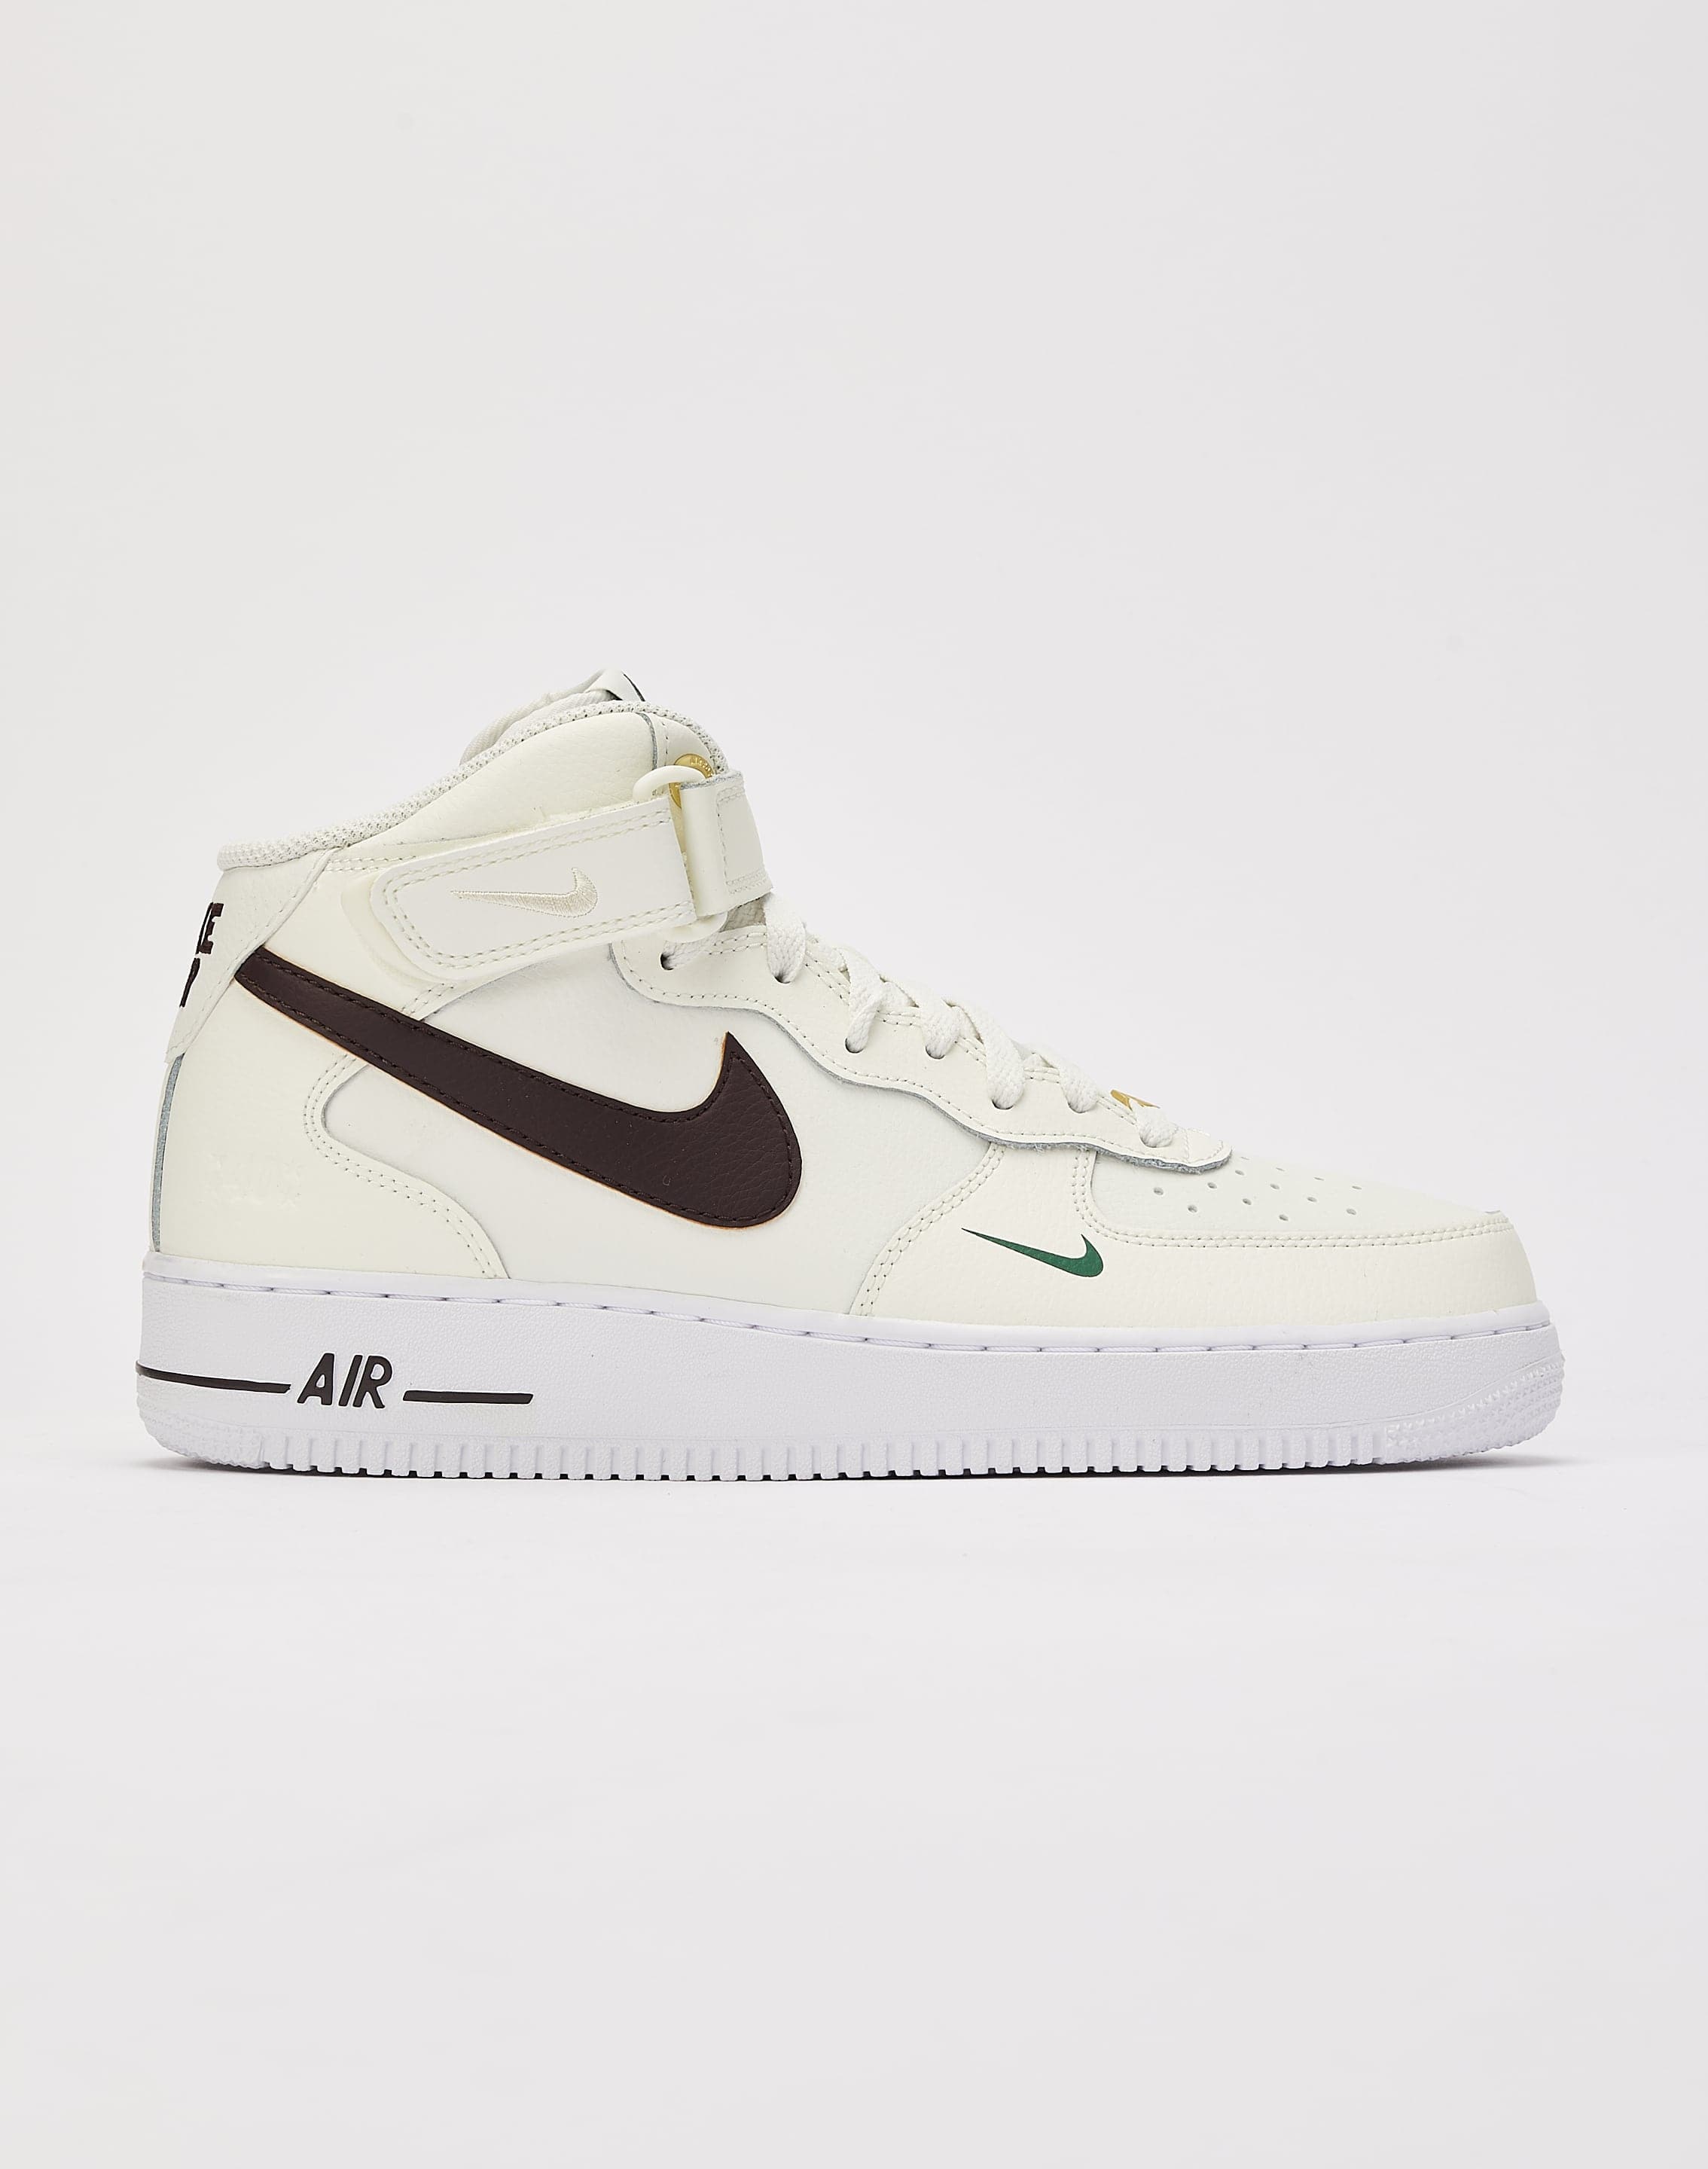 Nike Air Force 1 Mid '07 LV8 – DTLR